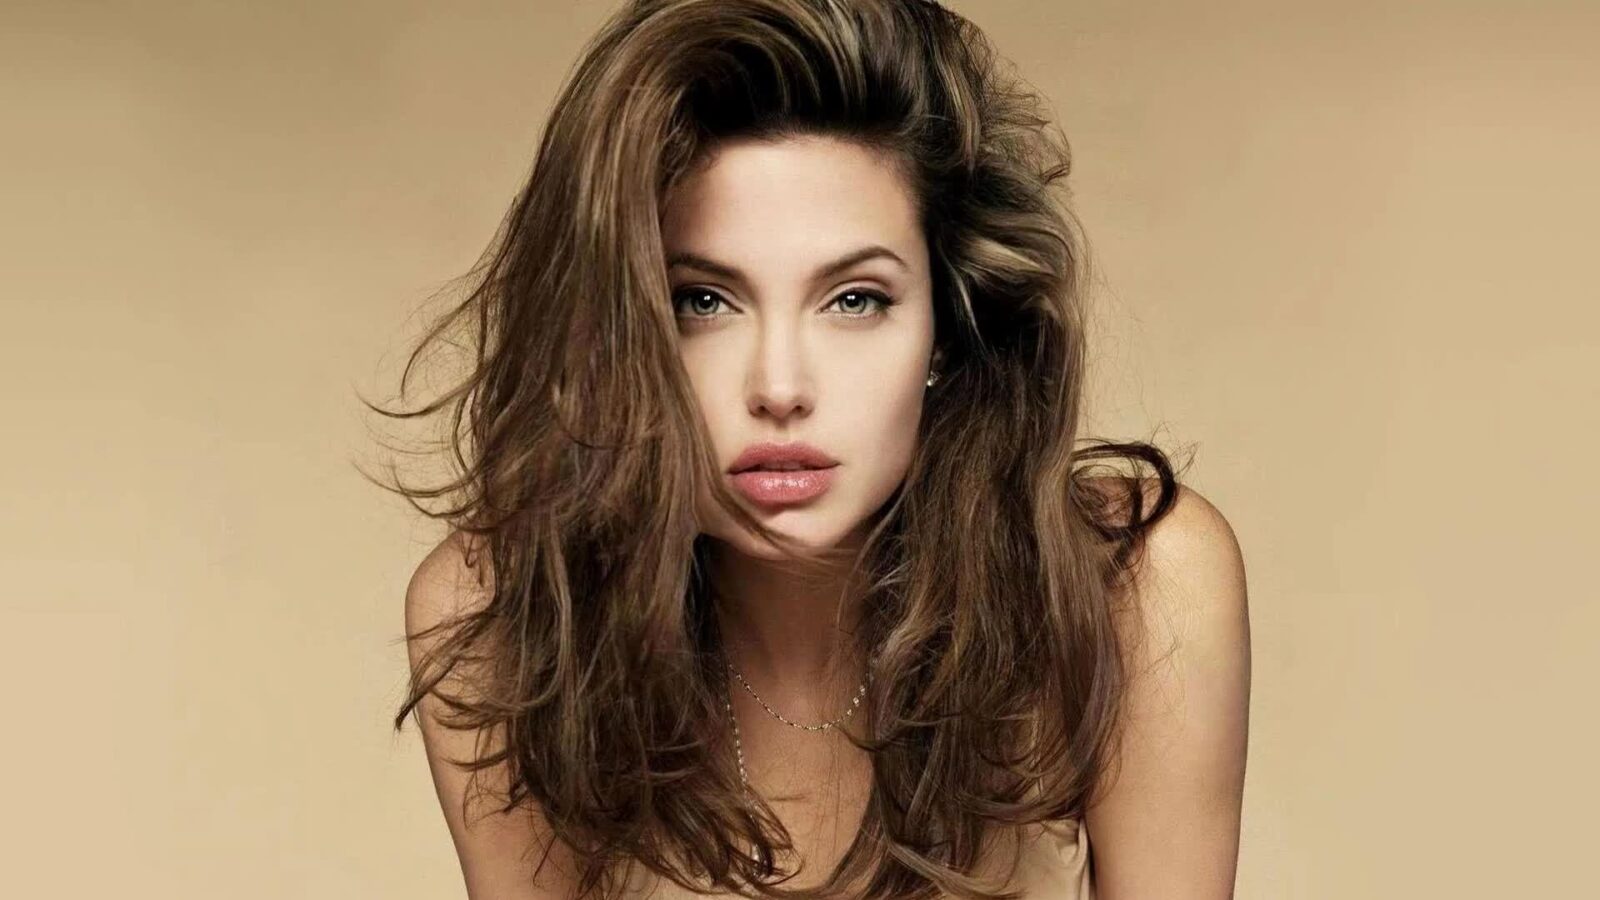 LiveWallpapers4Free.com | Angelina Jolie Beautiful Babe Long Hairs - Free Live Wallpaper